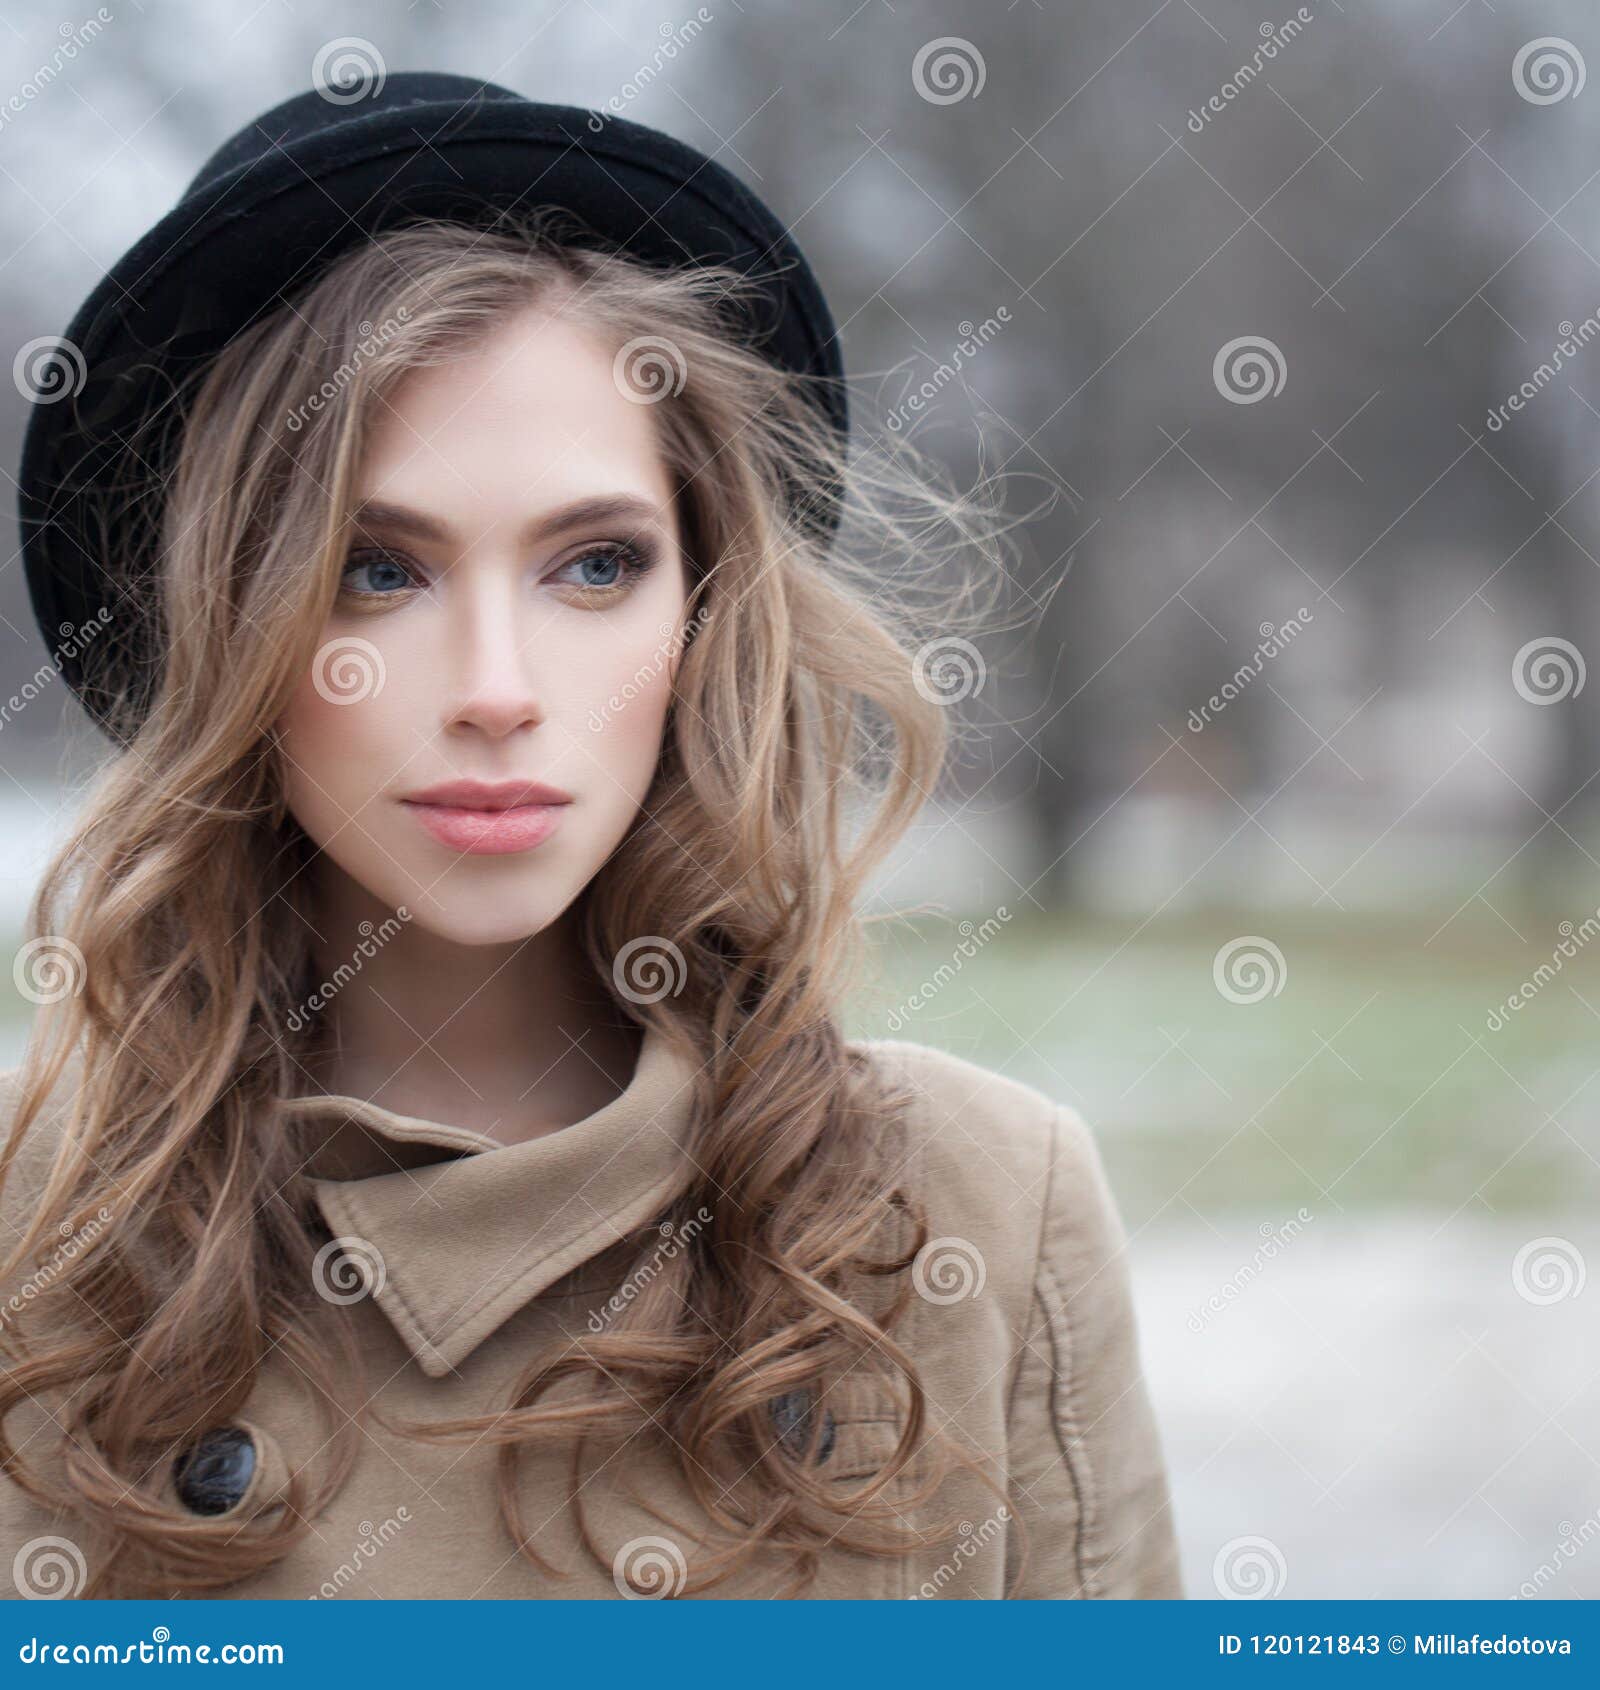 Attractive Young Woman with Wavy Hairstyle Outdoors Stock Image - Image ...